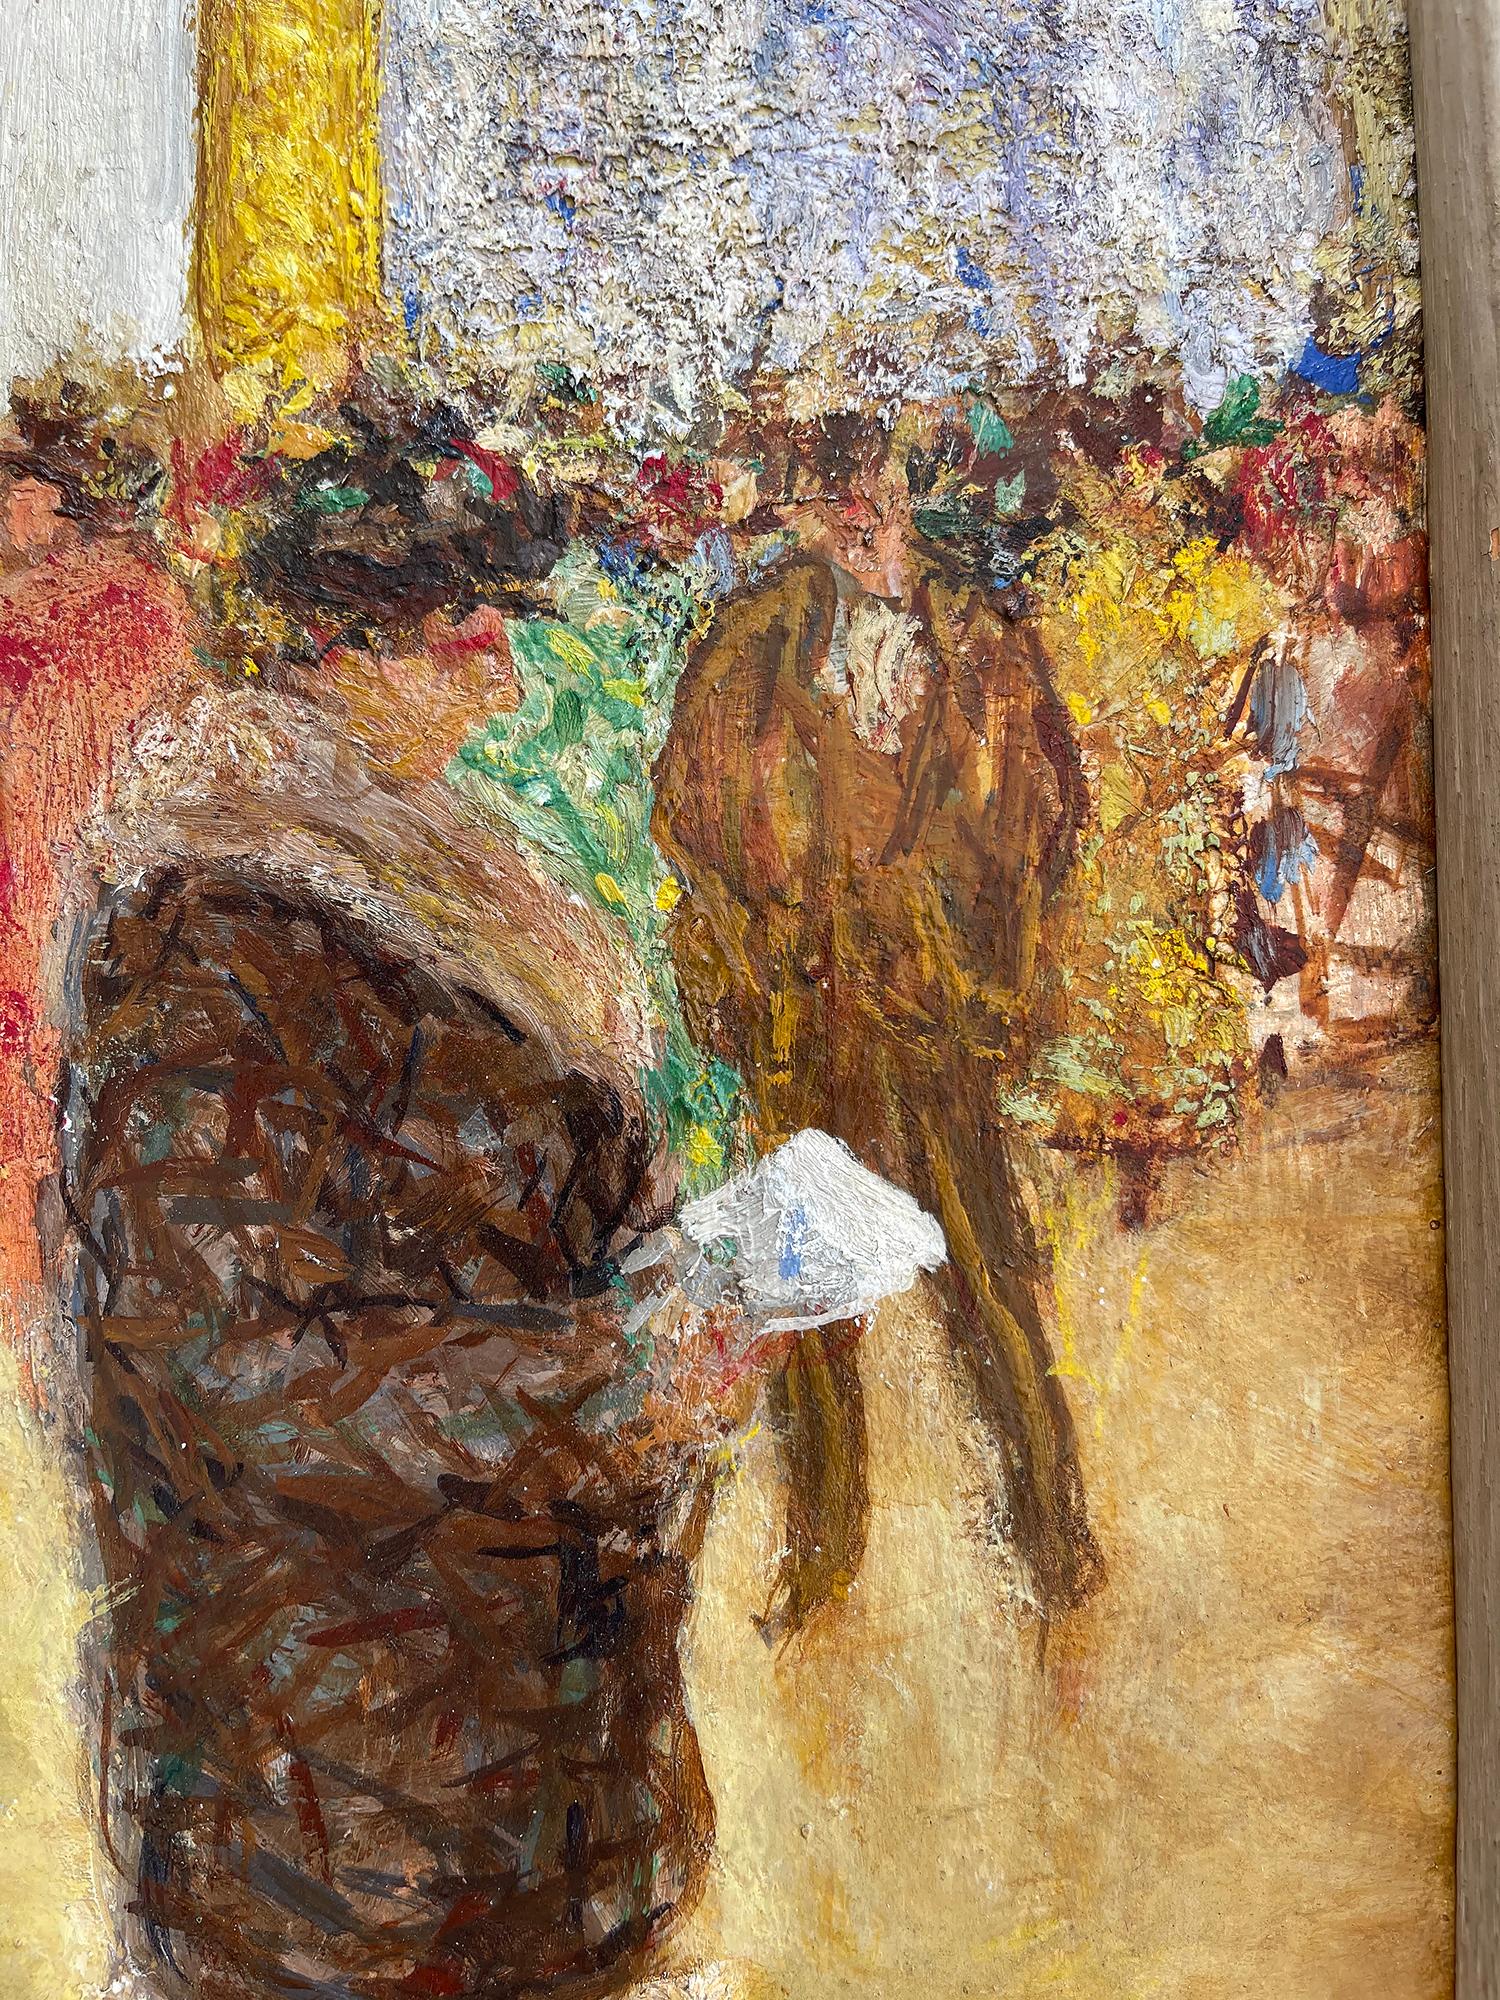 Museum Piece #2 Art Lover in Museum Exhibition - Post-Impressionist Painting by Arnold Friedman